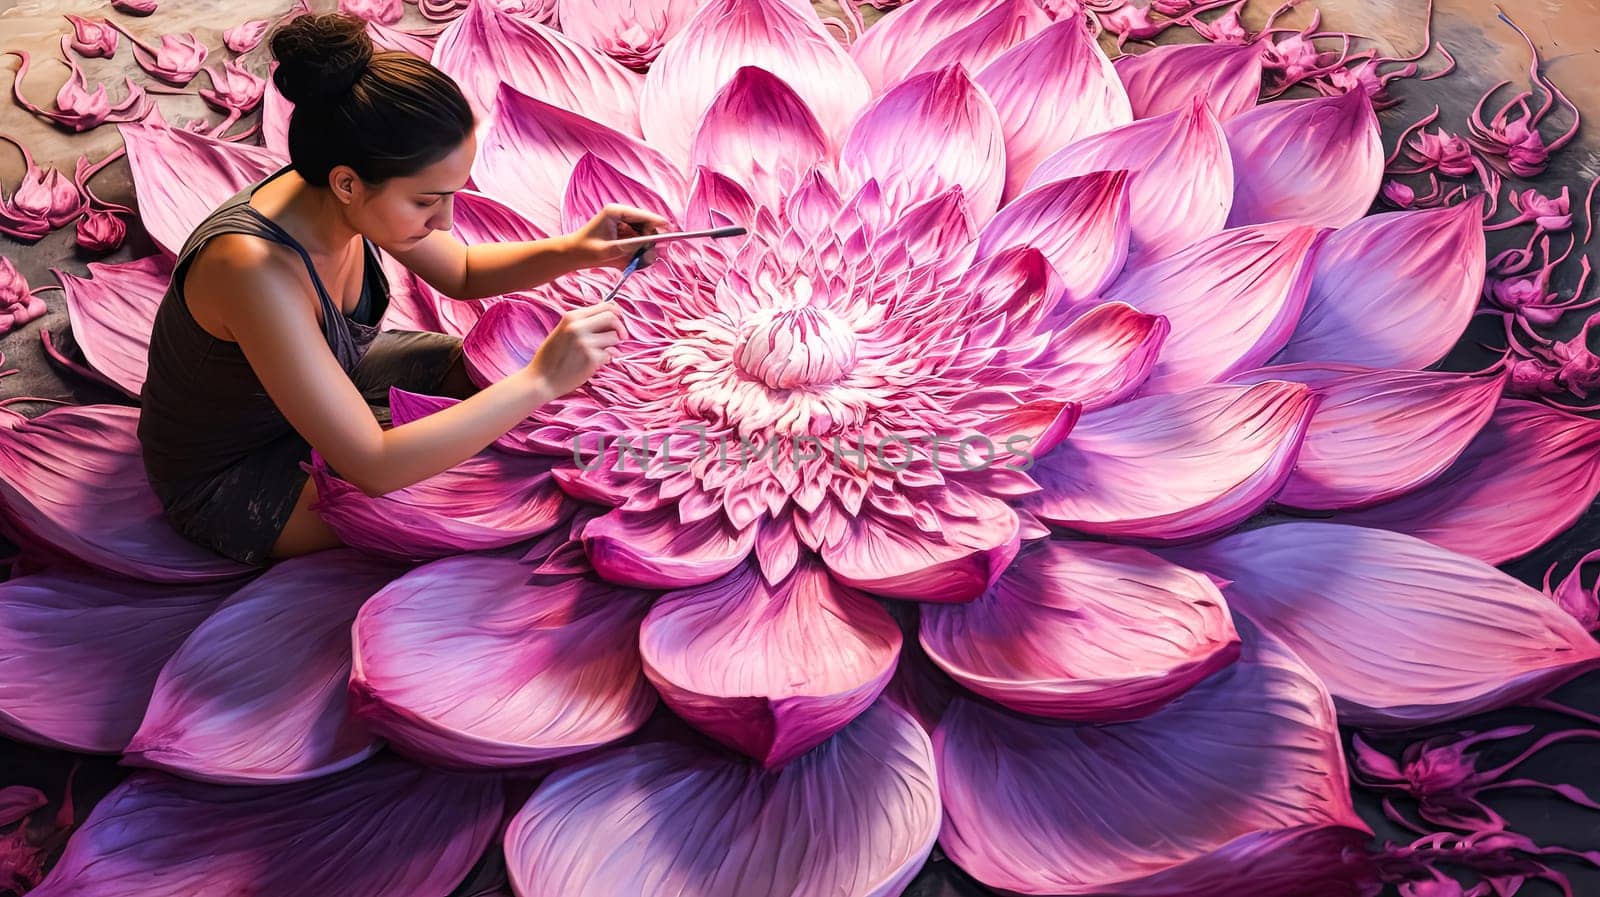 A woman is painting a large flower on a floor. The flower is very colorful and has a lot of detail. The woman is using a brush to paint the flower, and there are several other brushes